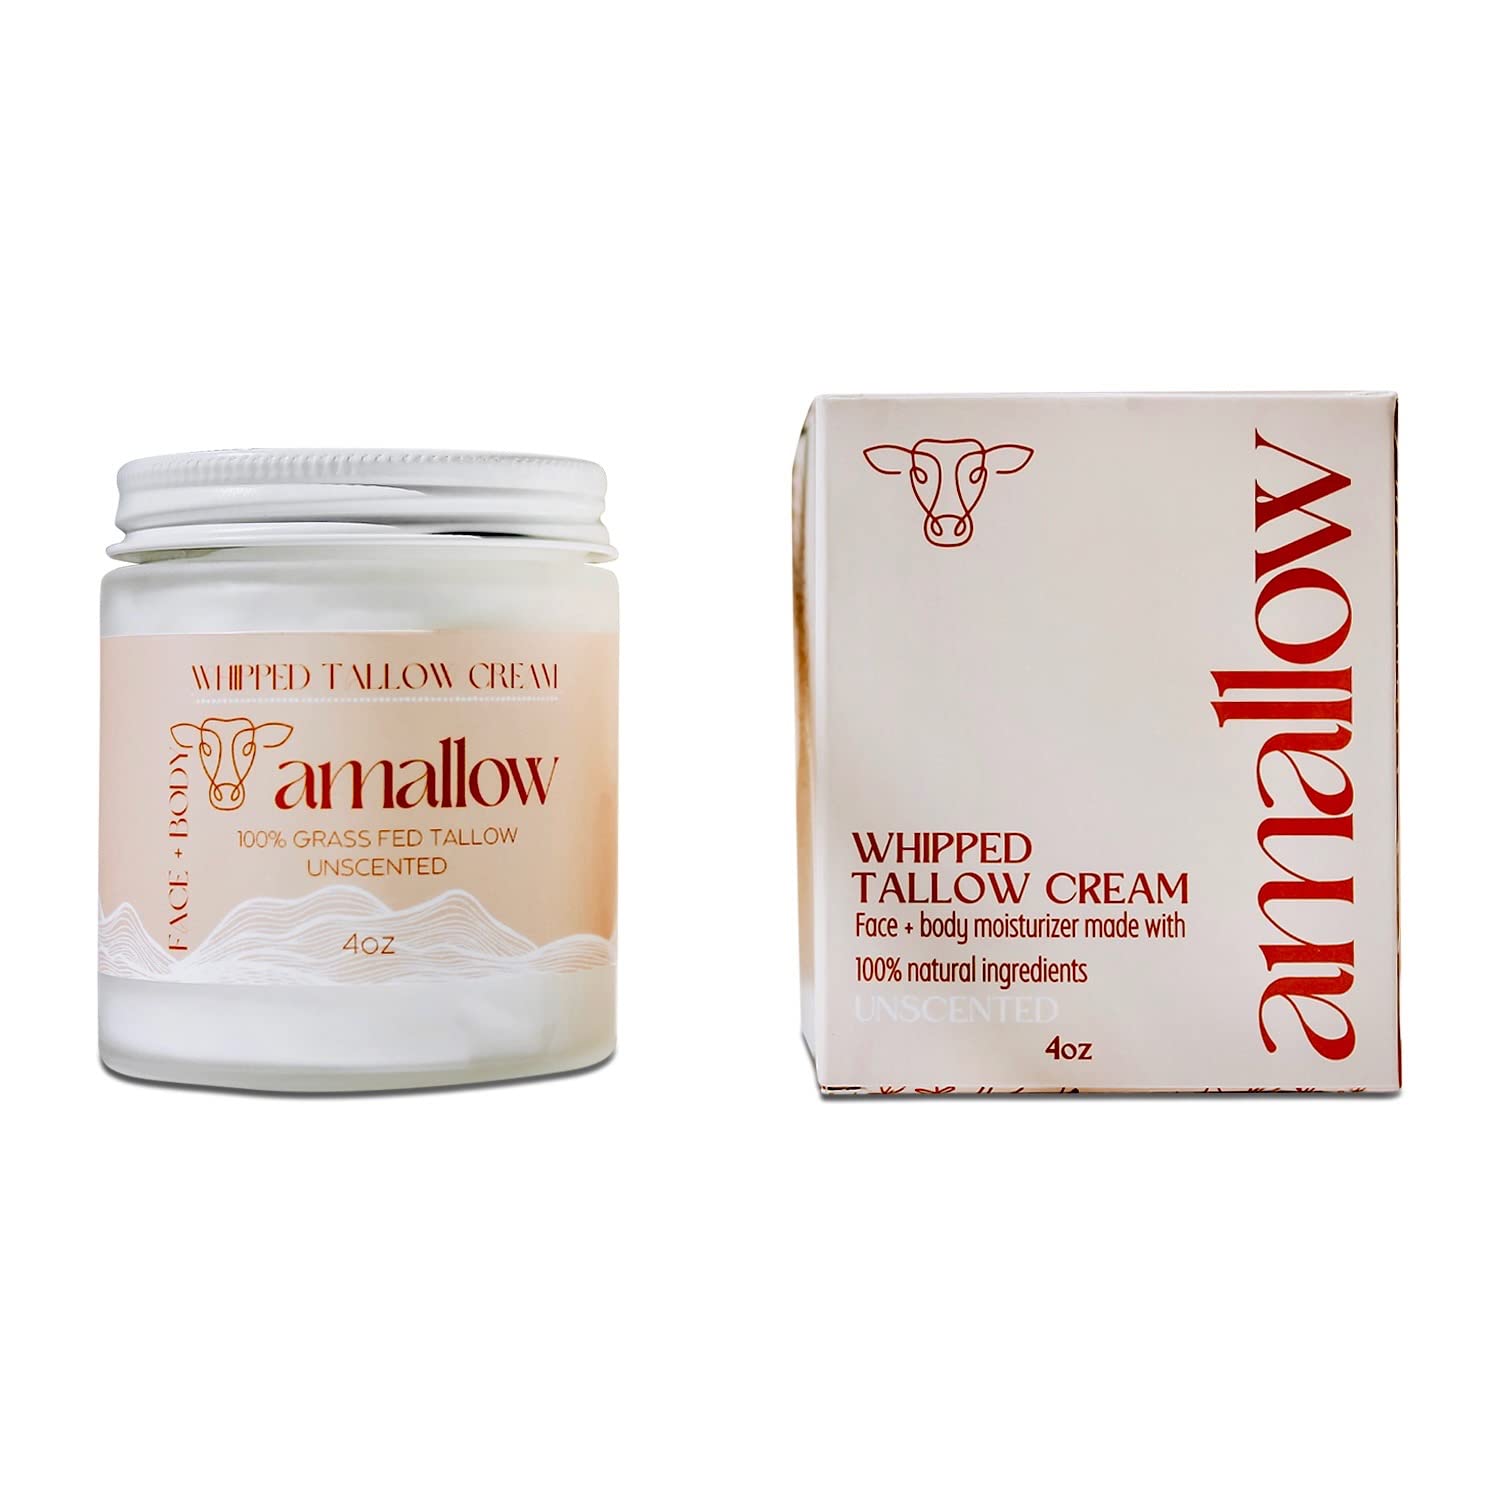 The Secret Weapon to Win the Battle Against Dry Skin This Winter? Tallow Cream!